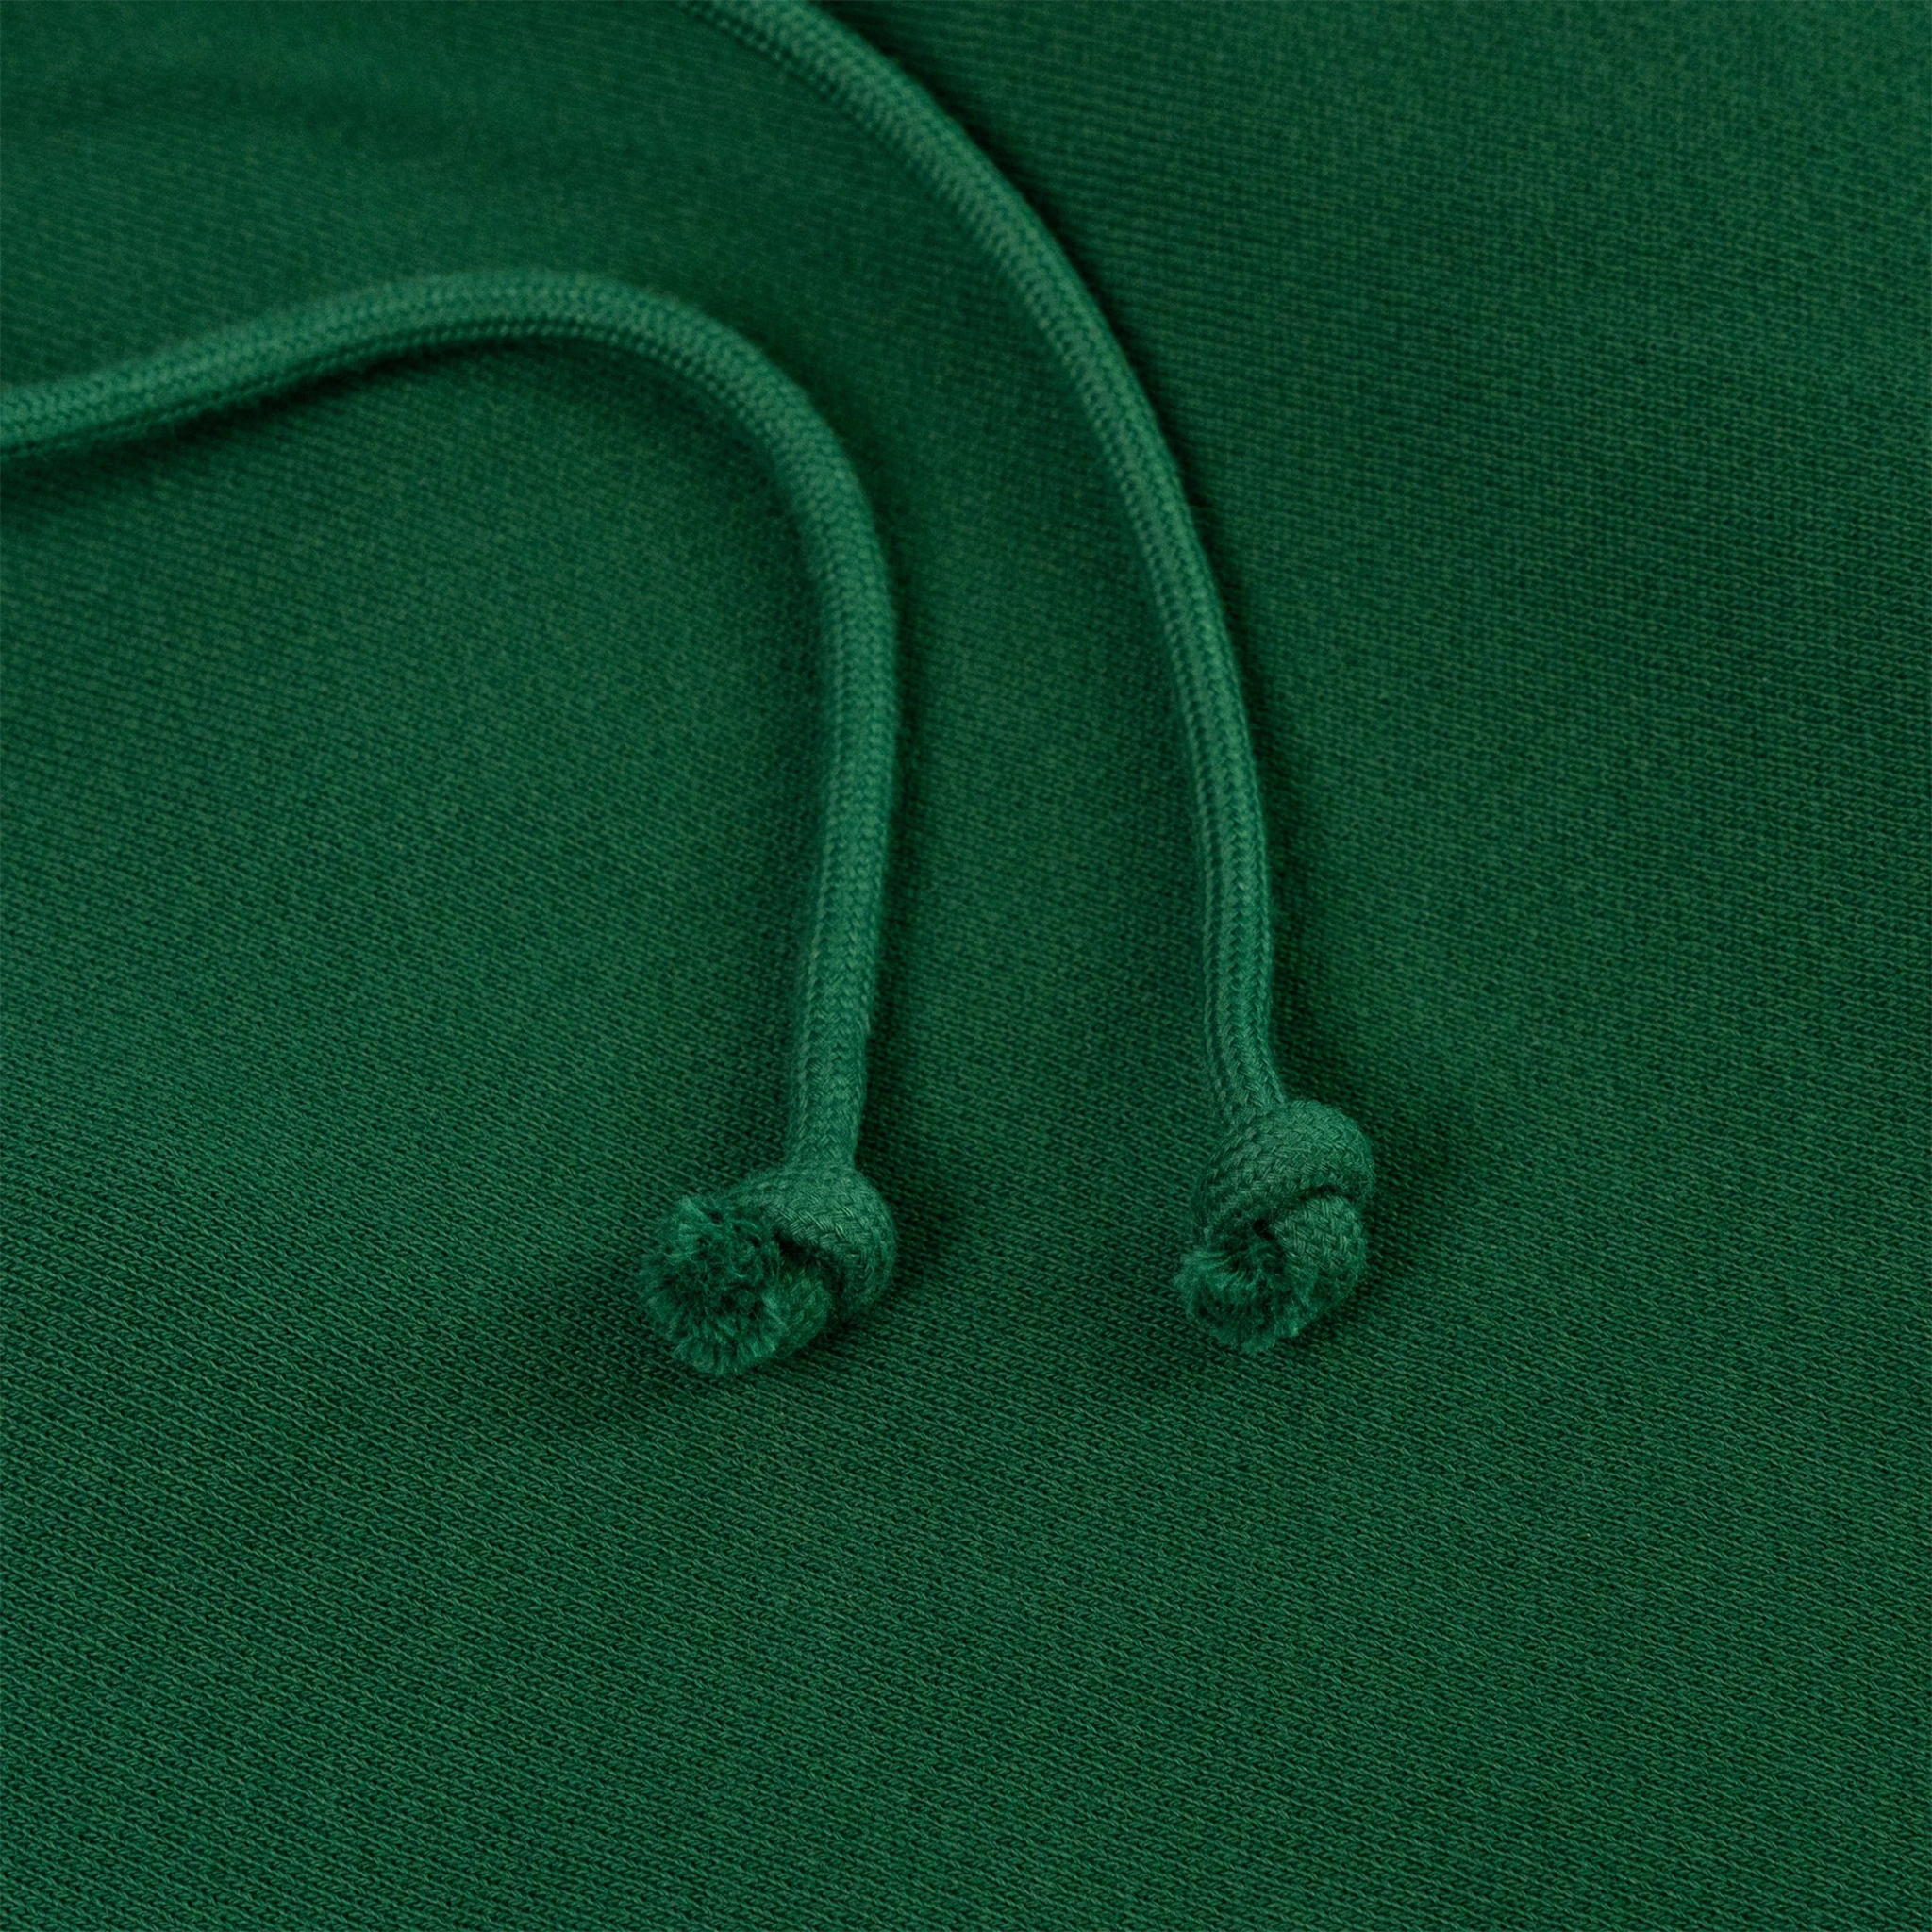 Strings view of Eric Emanuel EE Basic Green White Sweatpants